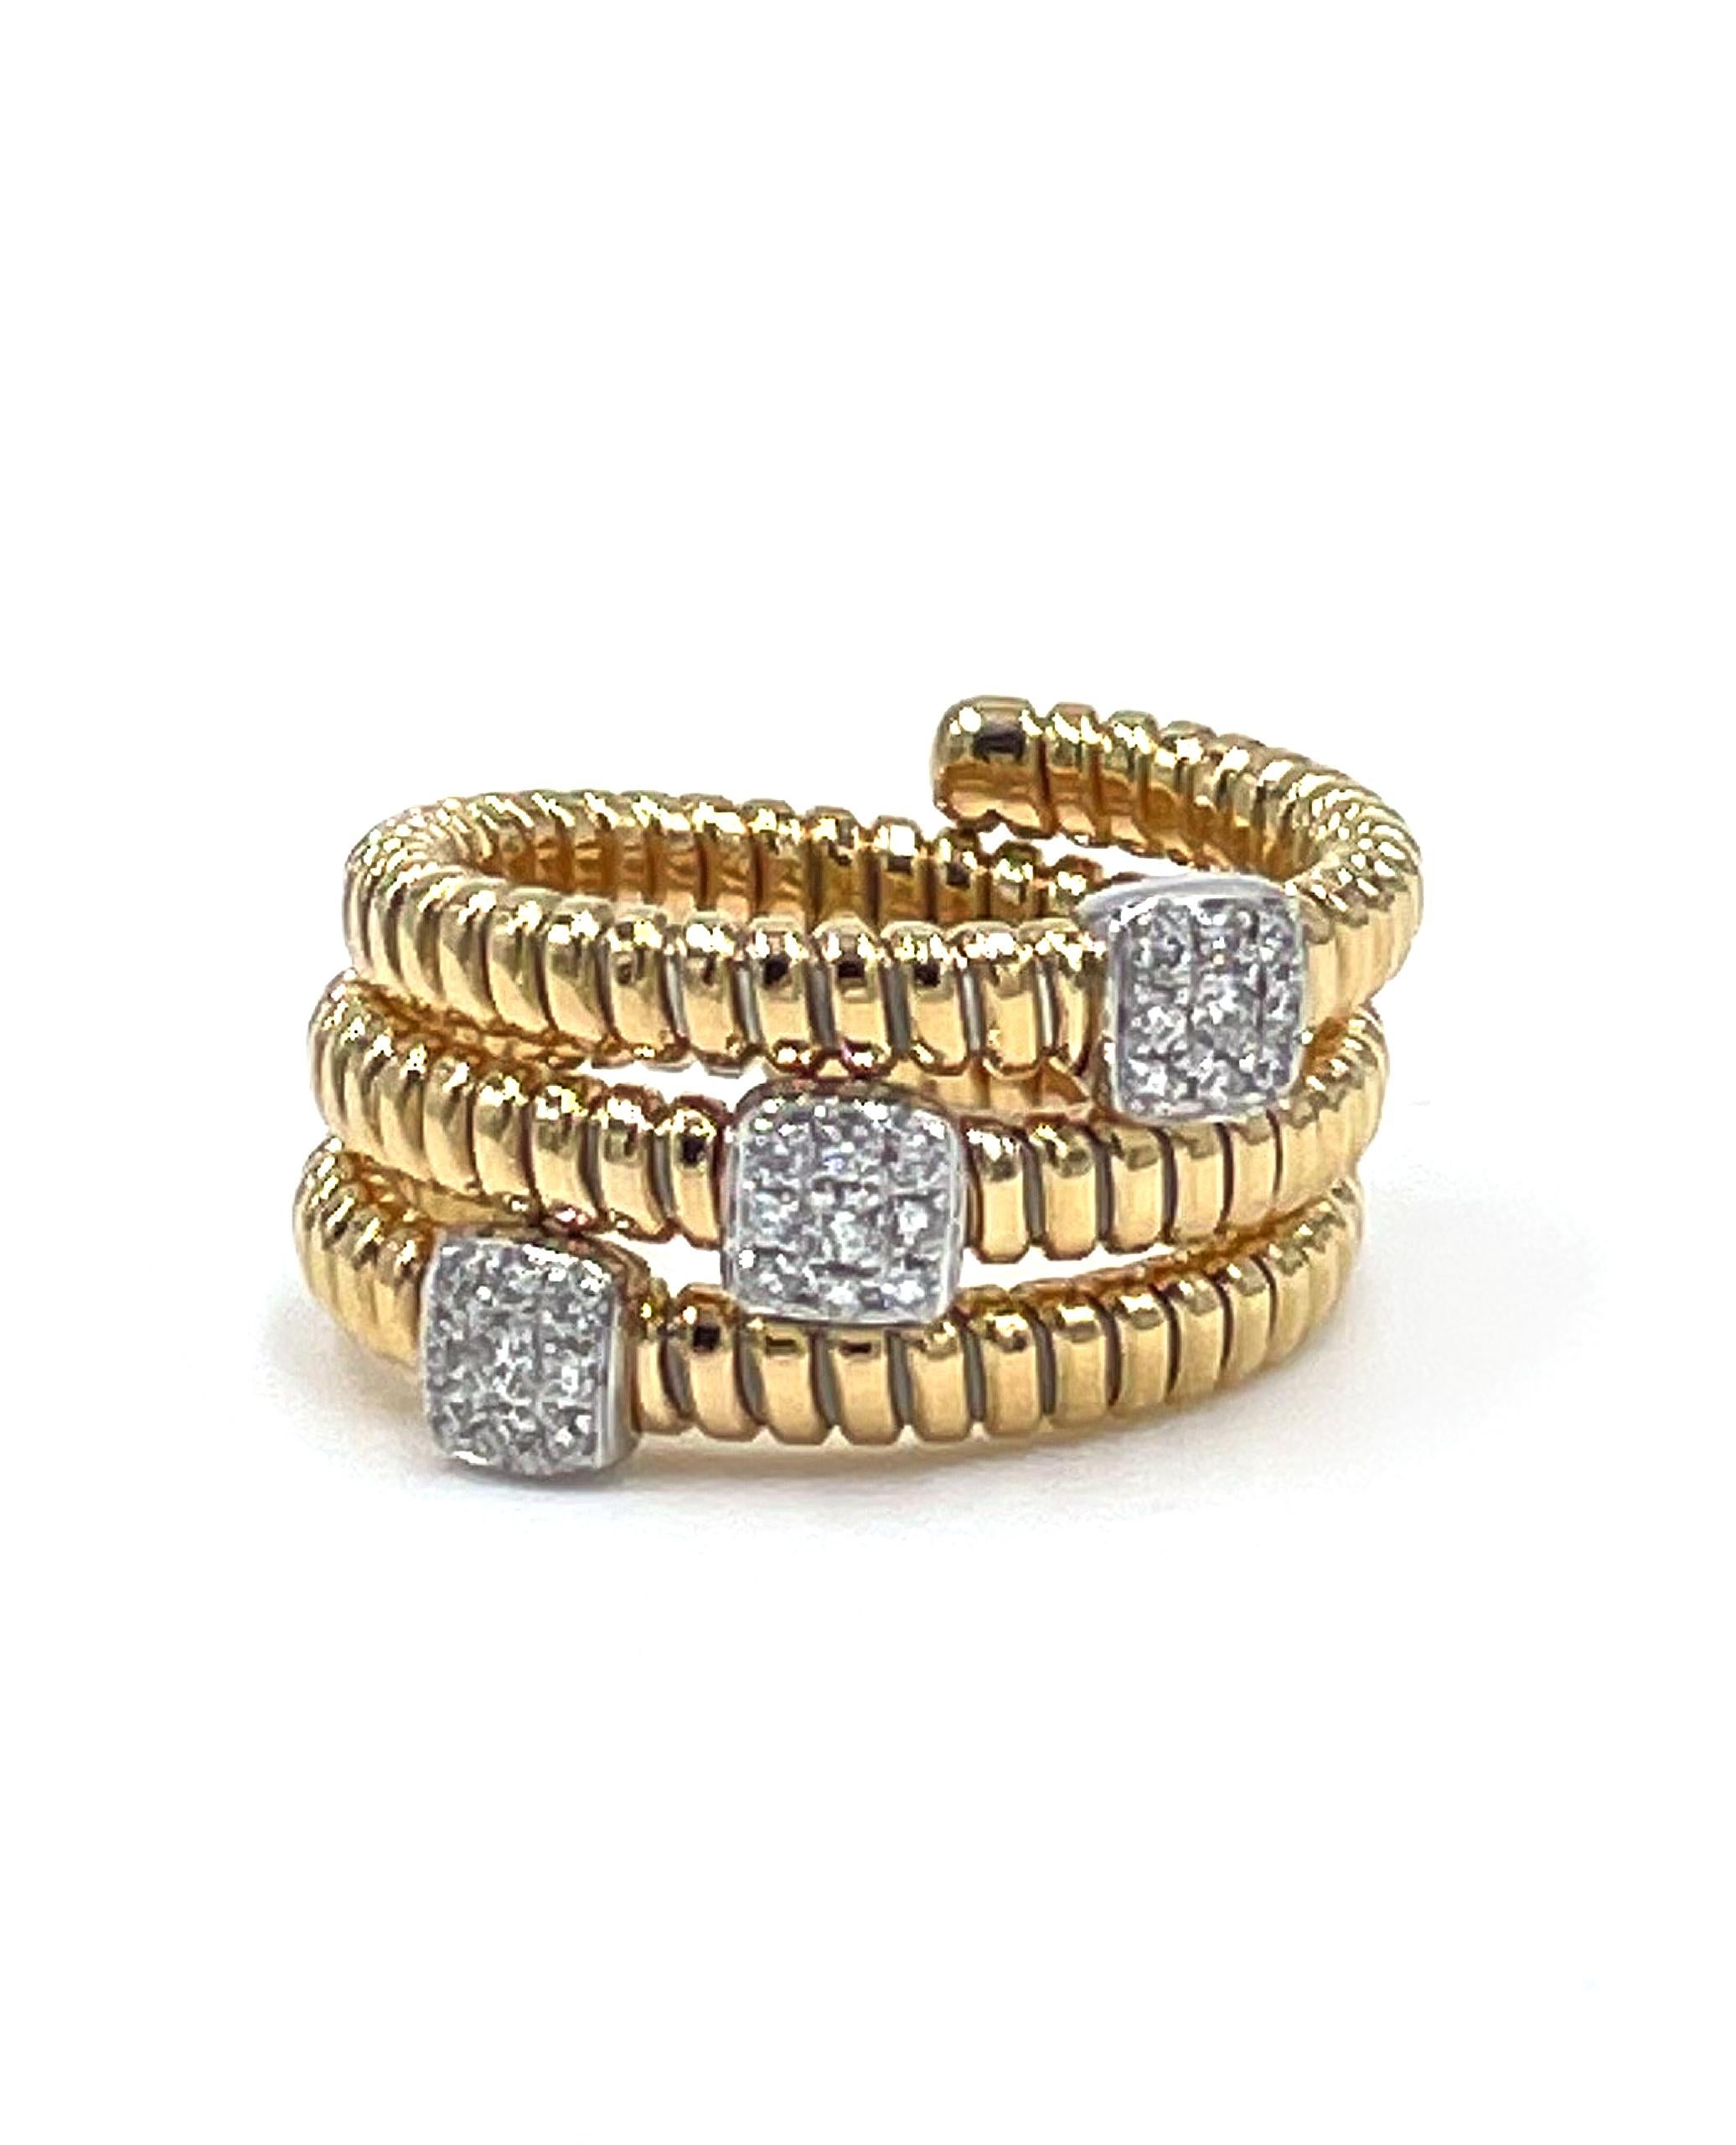 18K yellow gold wrap flexible ring with rib detailing and round brilliant-cut diamonds pave set into 3 square stations. Total diamond weight 0.22 carats: G color, VS2/SI1 clarity.

- Size 6.5 but can expand until size 7